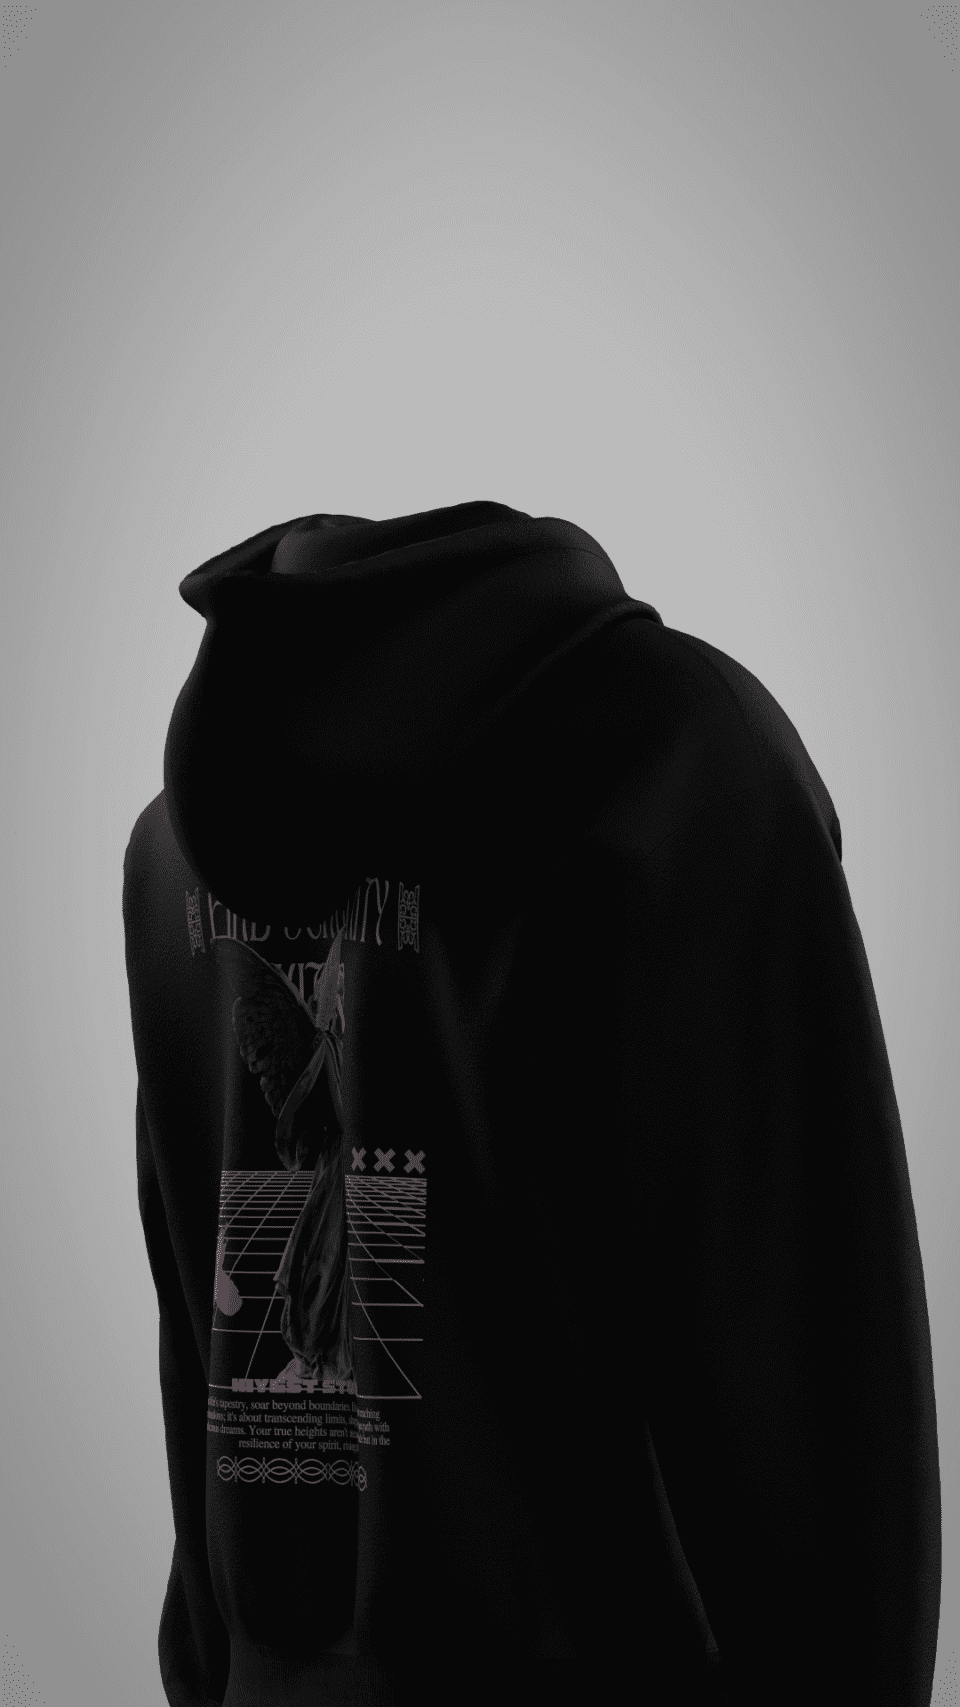 black category, premium backprint black category: designer clothing with prints, category  online, category store near me, best black oversized hoodie on sale, affordable black category for men & women, black black category